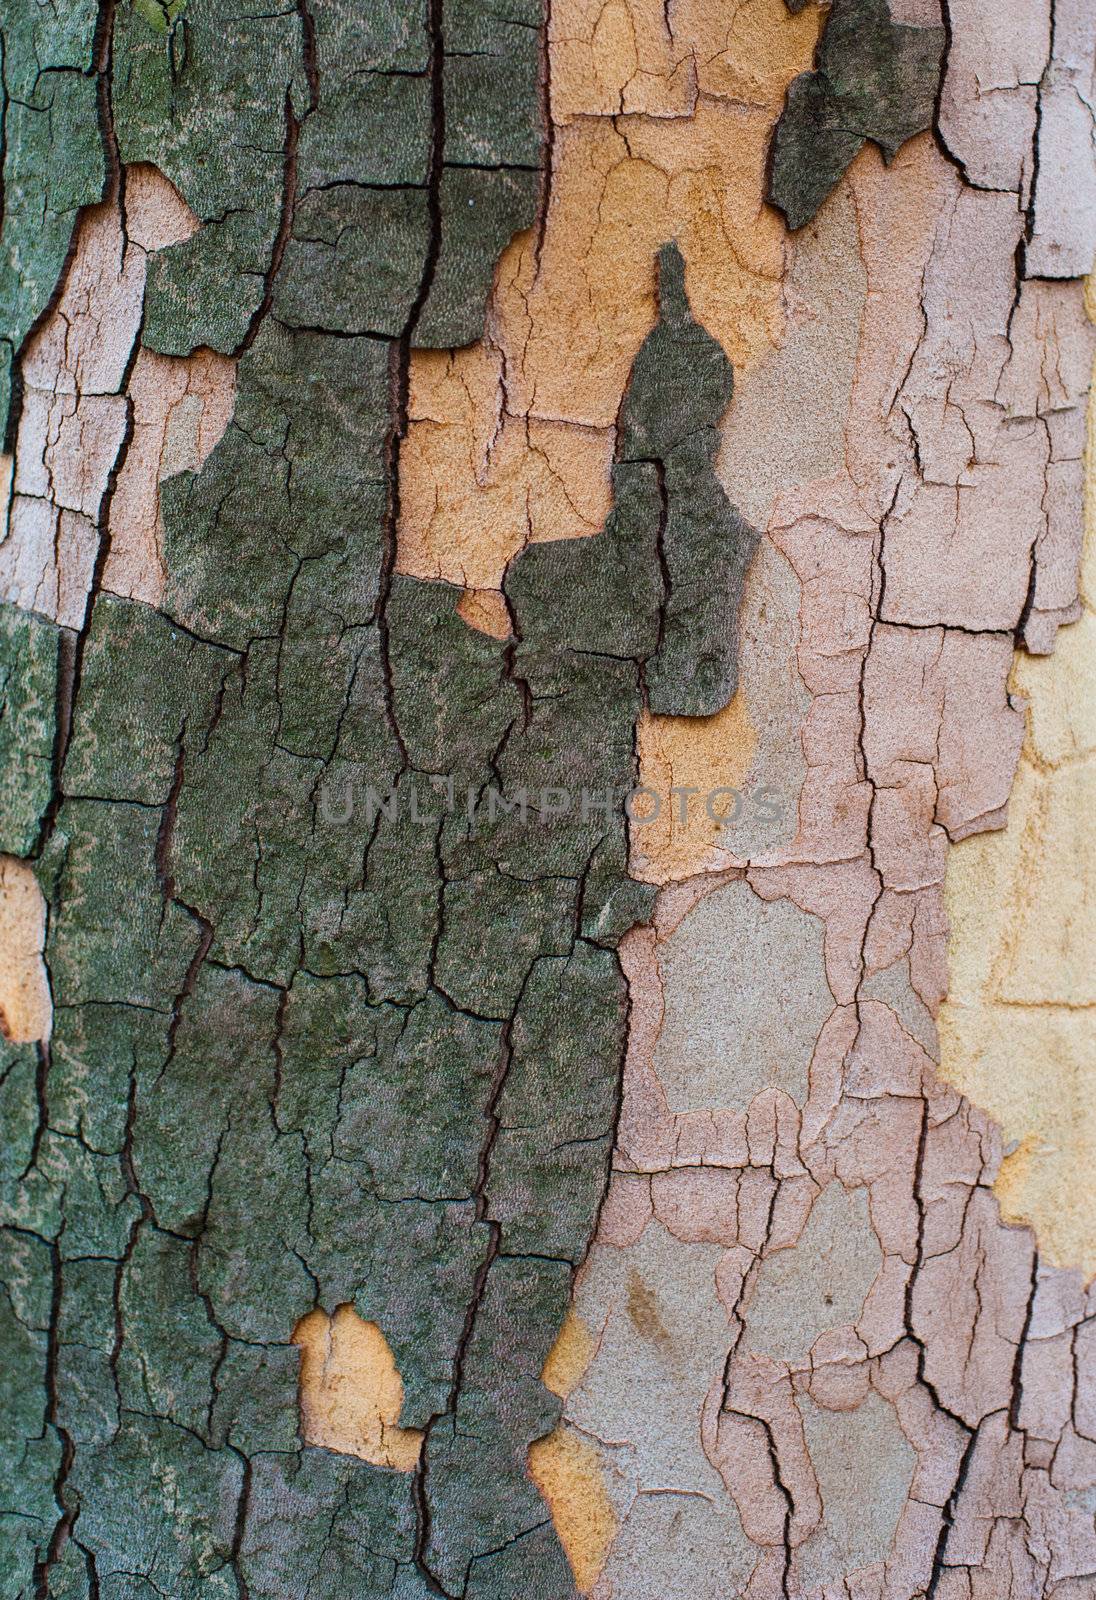 The bark of a sycamore tree. High resolution texture